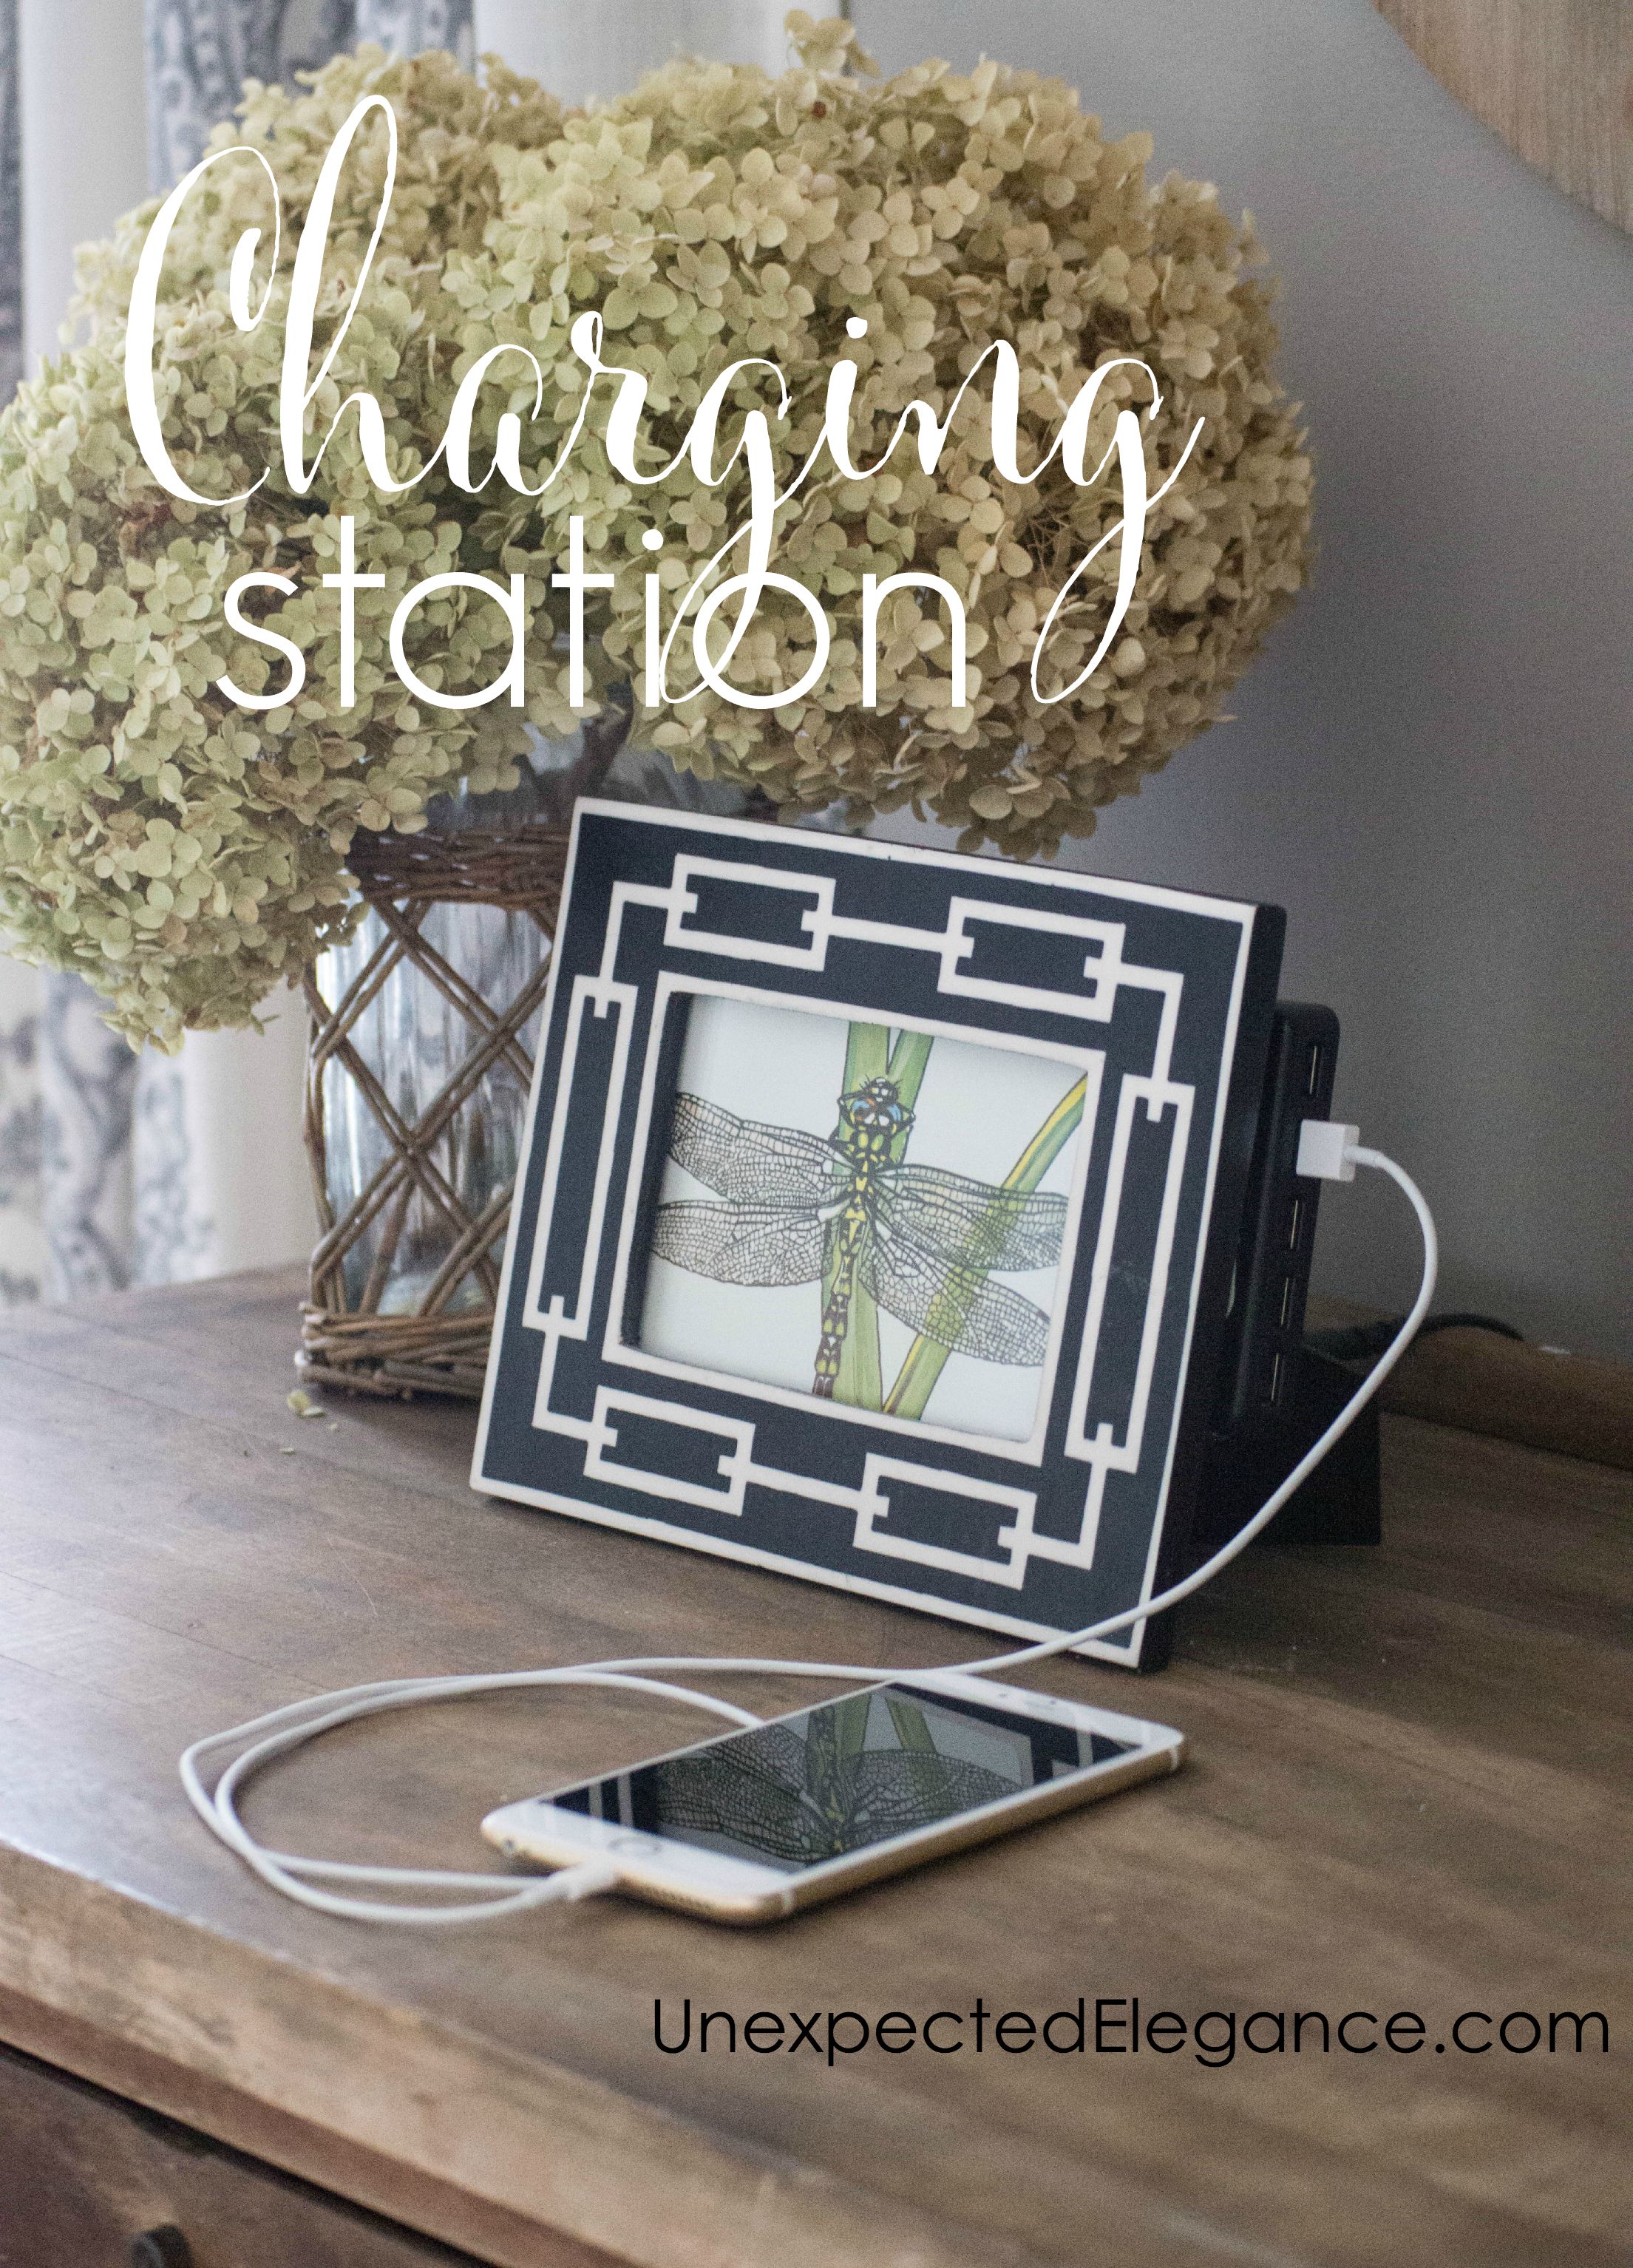 Are you tired of the mess of cords? Here's an EASY and quick DIY charging station that's not only functional but pretty too!